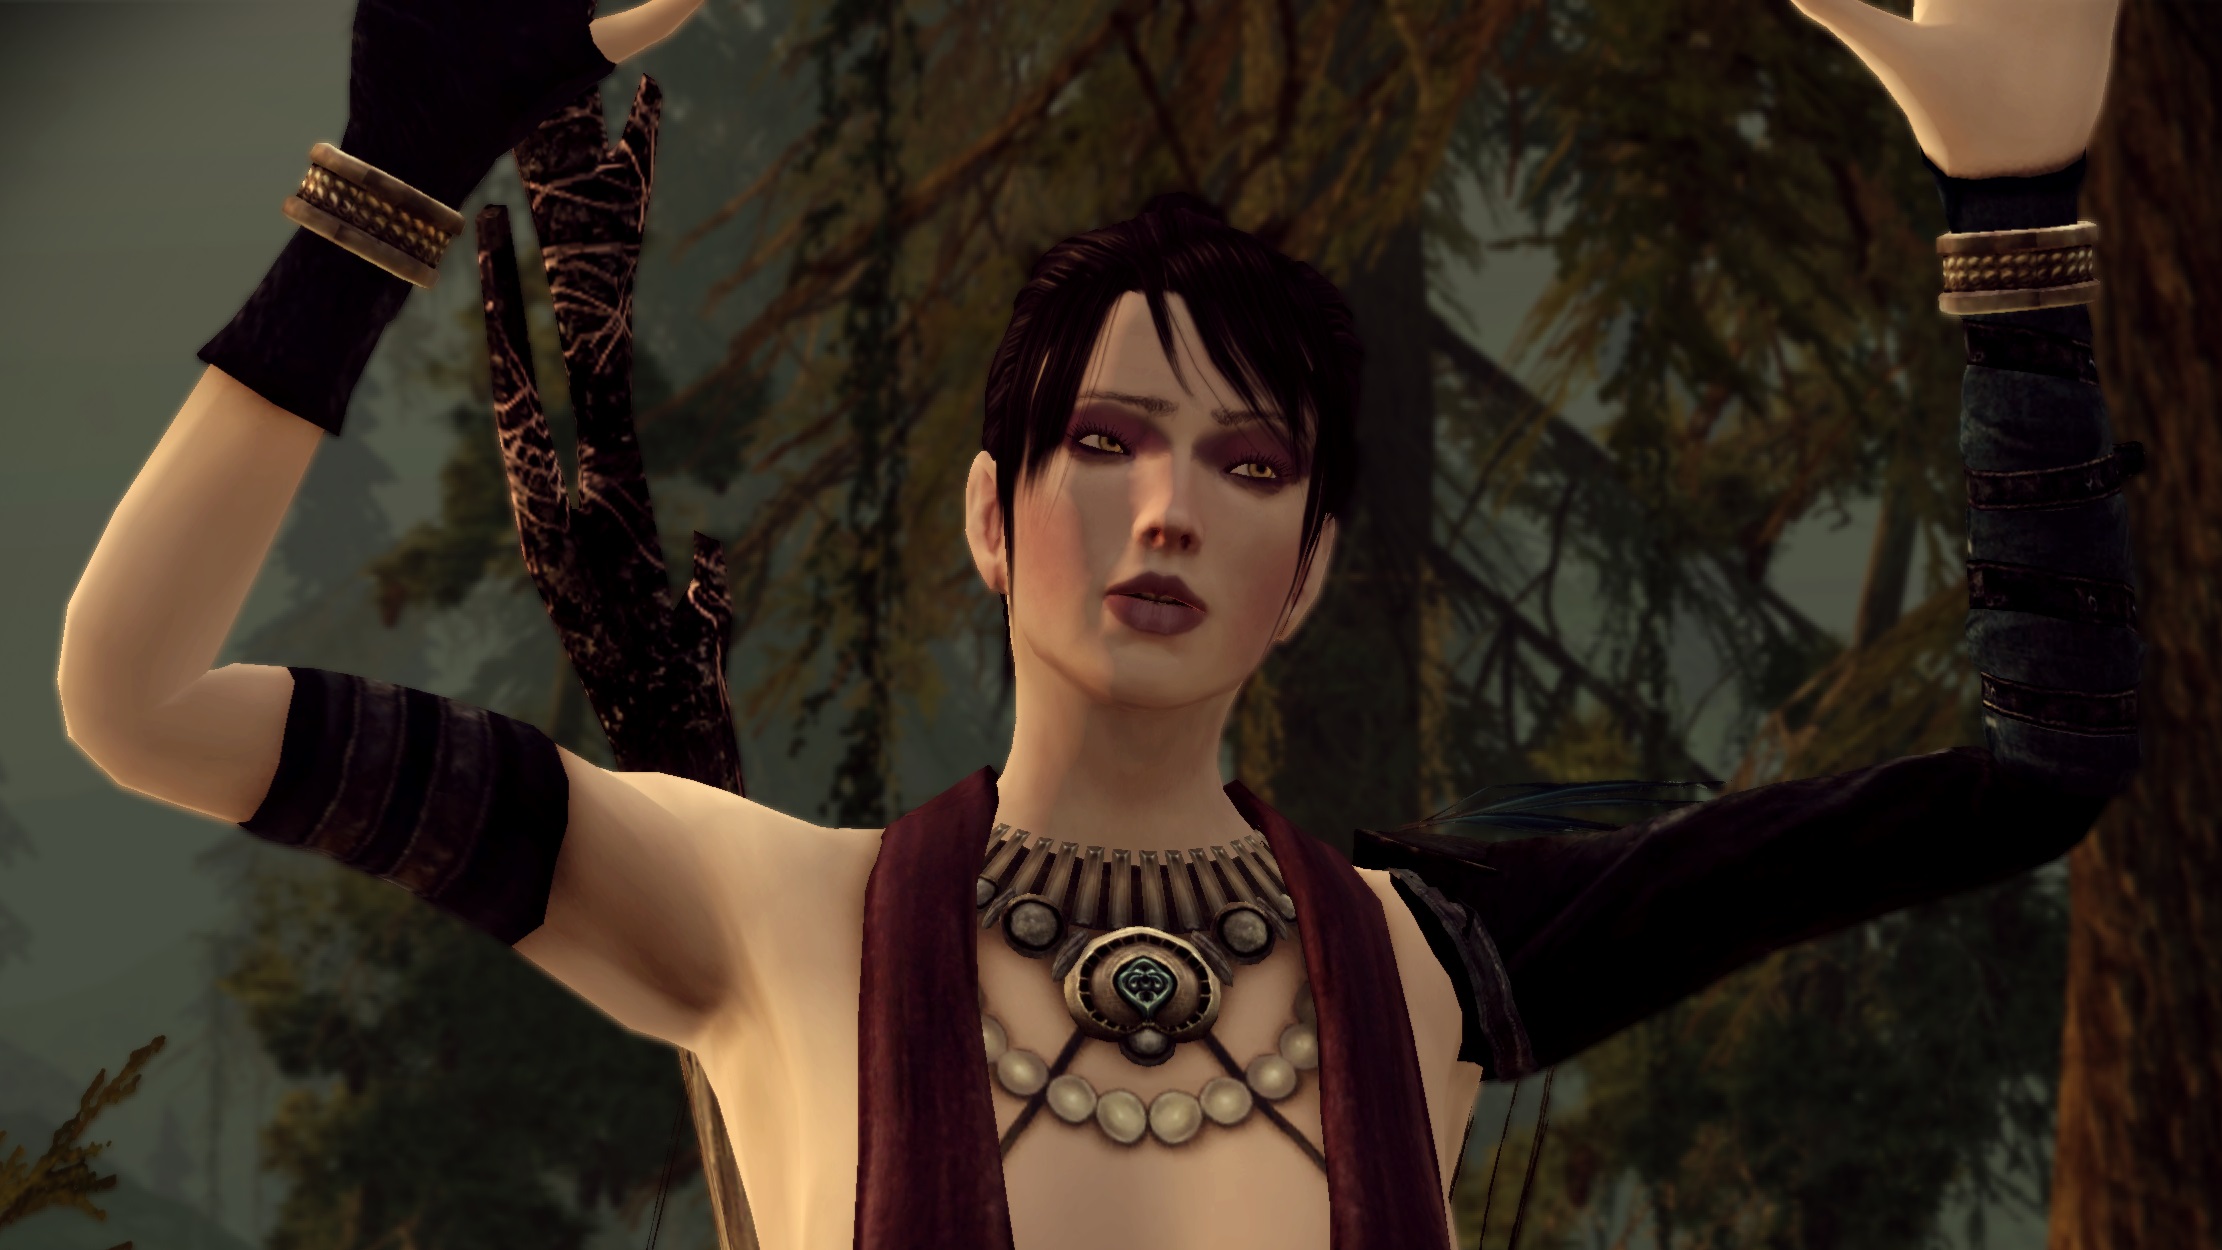  Meet the actual therapist using Dragon Age to teach relationship skills 